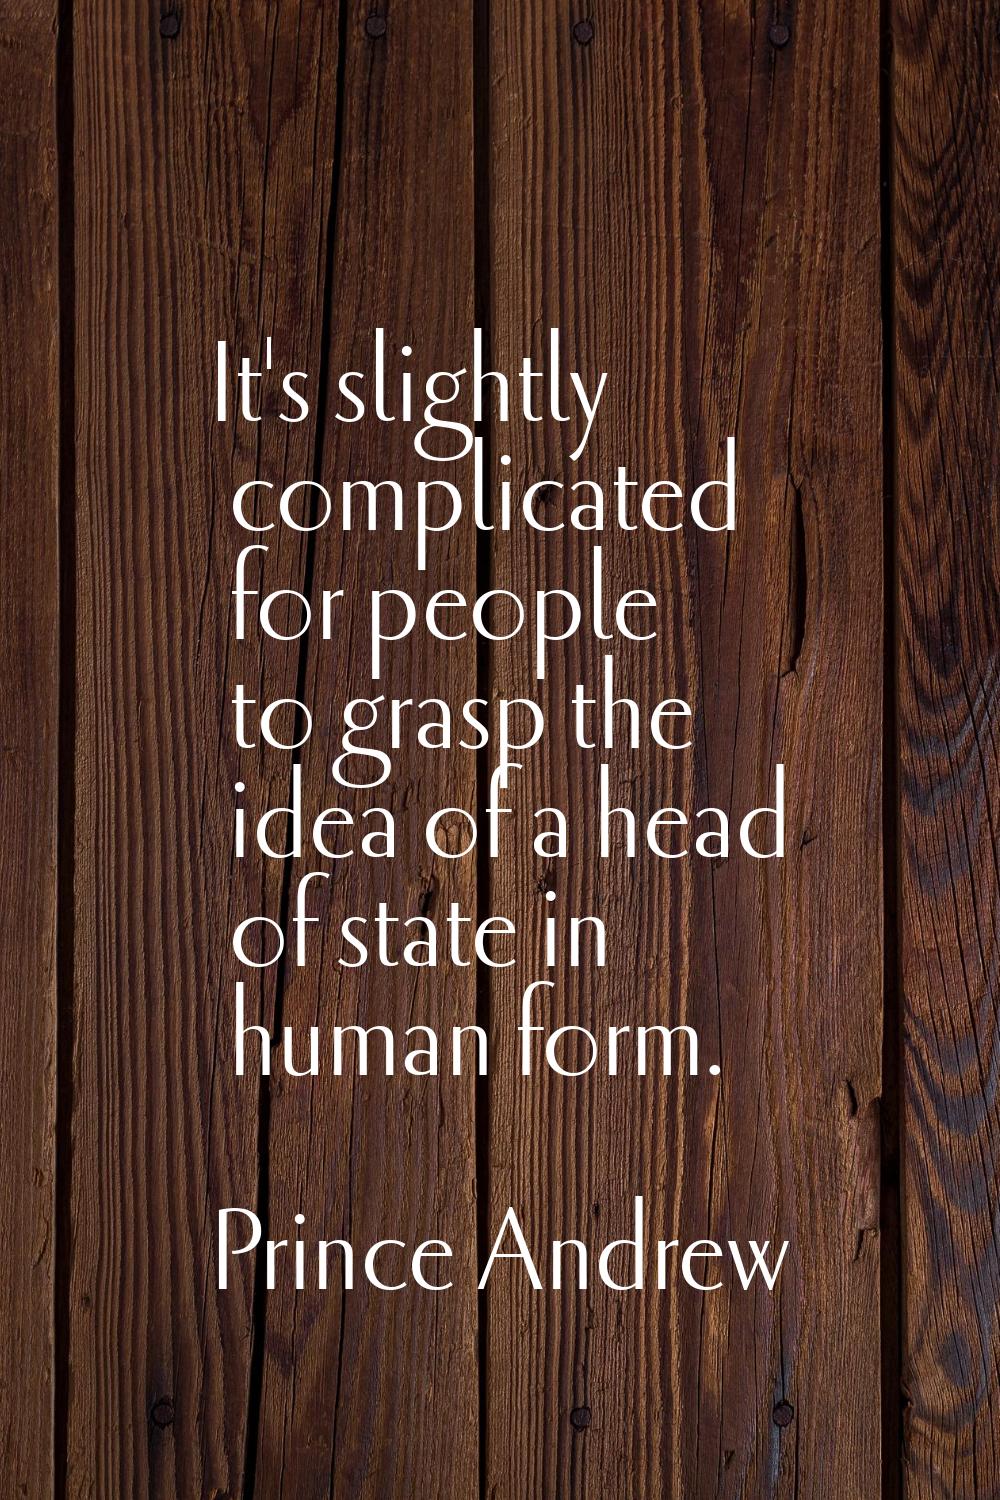 It's slightly complicated for people to grasp the idea of a head of state in human form.